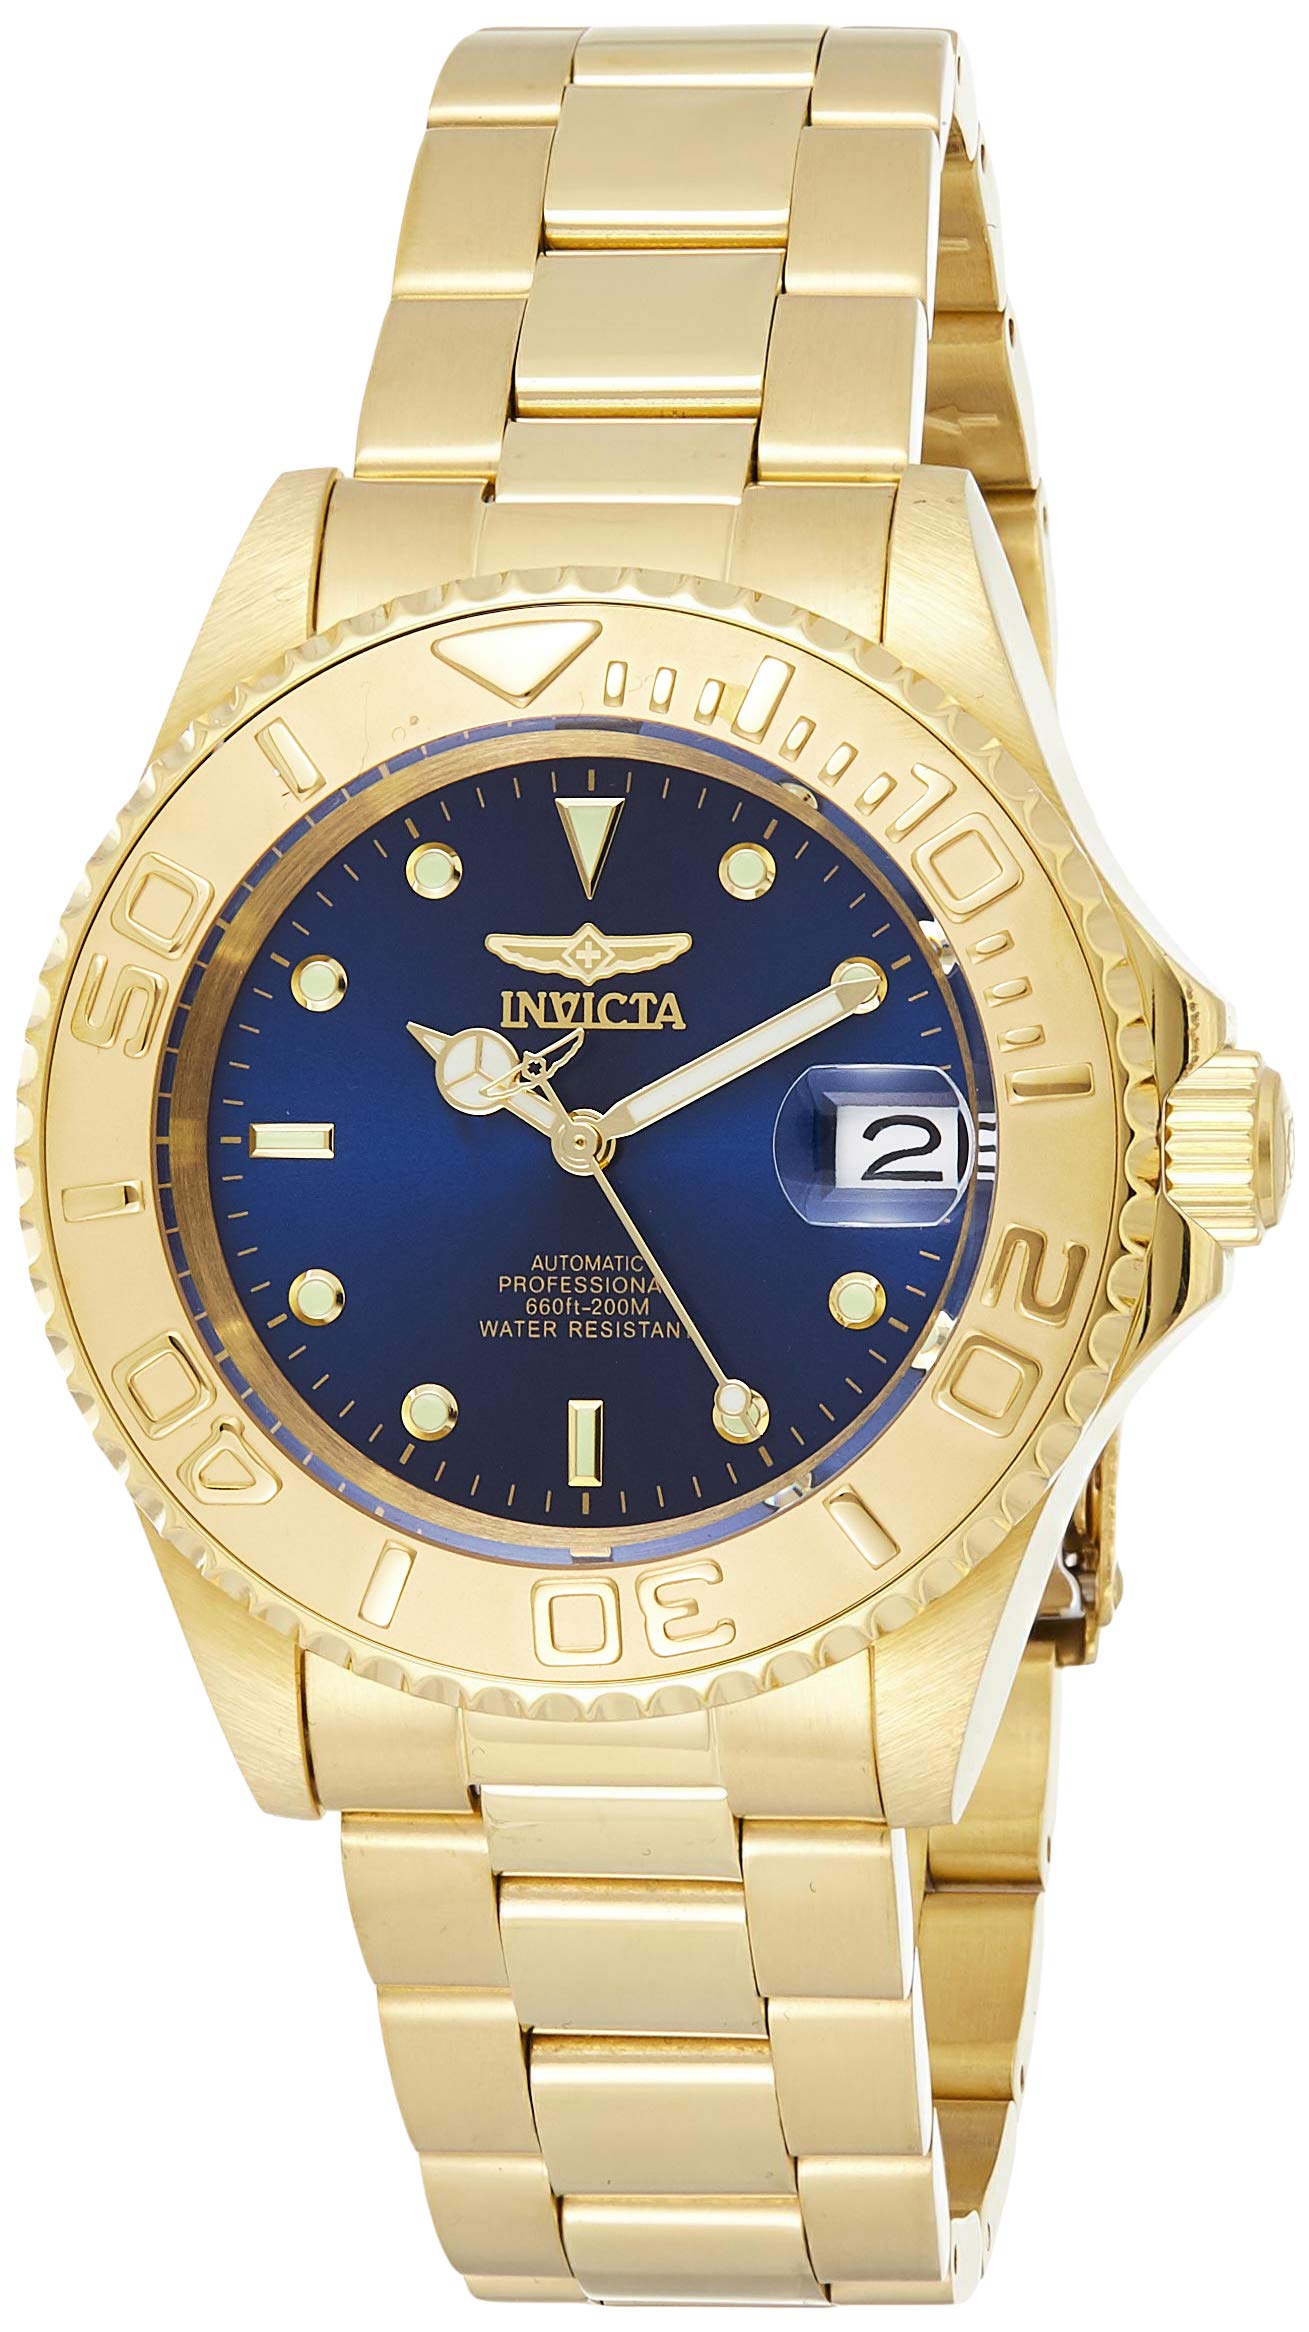 Invicta Men's 26997 Pro Diver Analog Display Automatic Self Wind Gold Watch, Blue